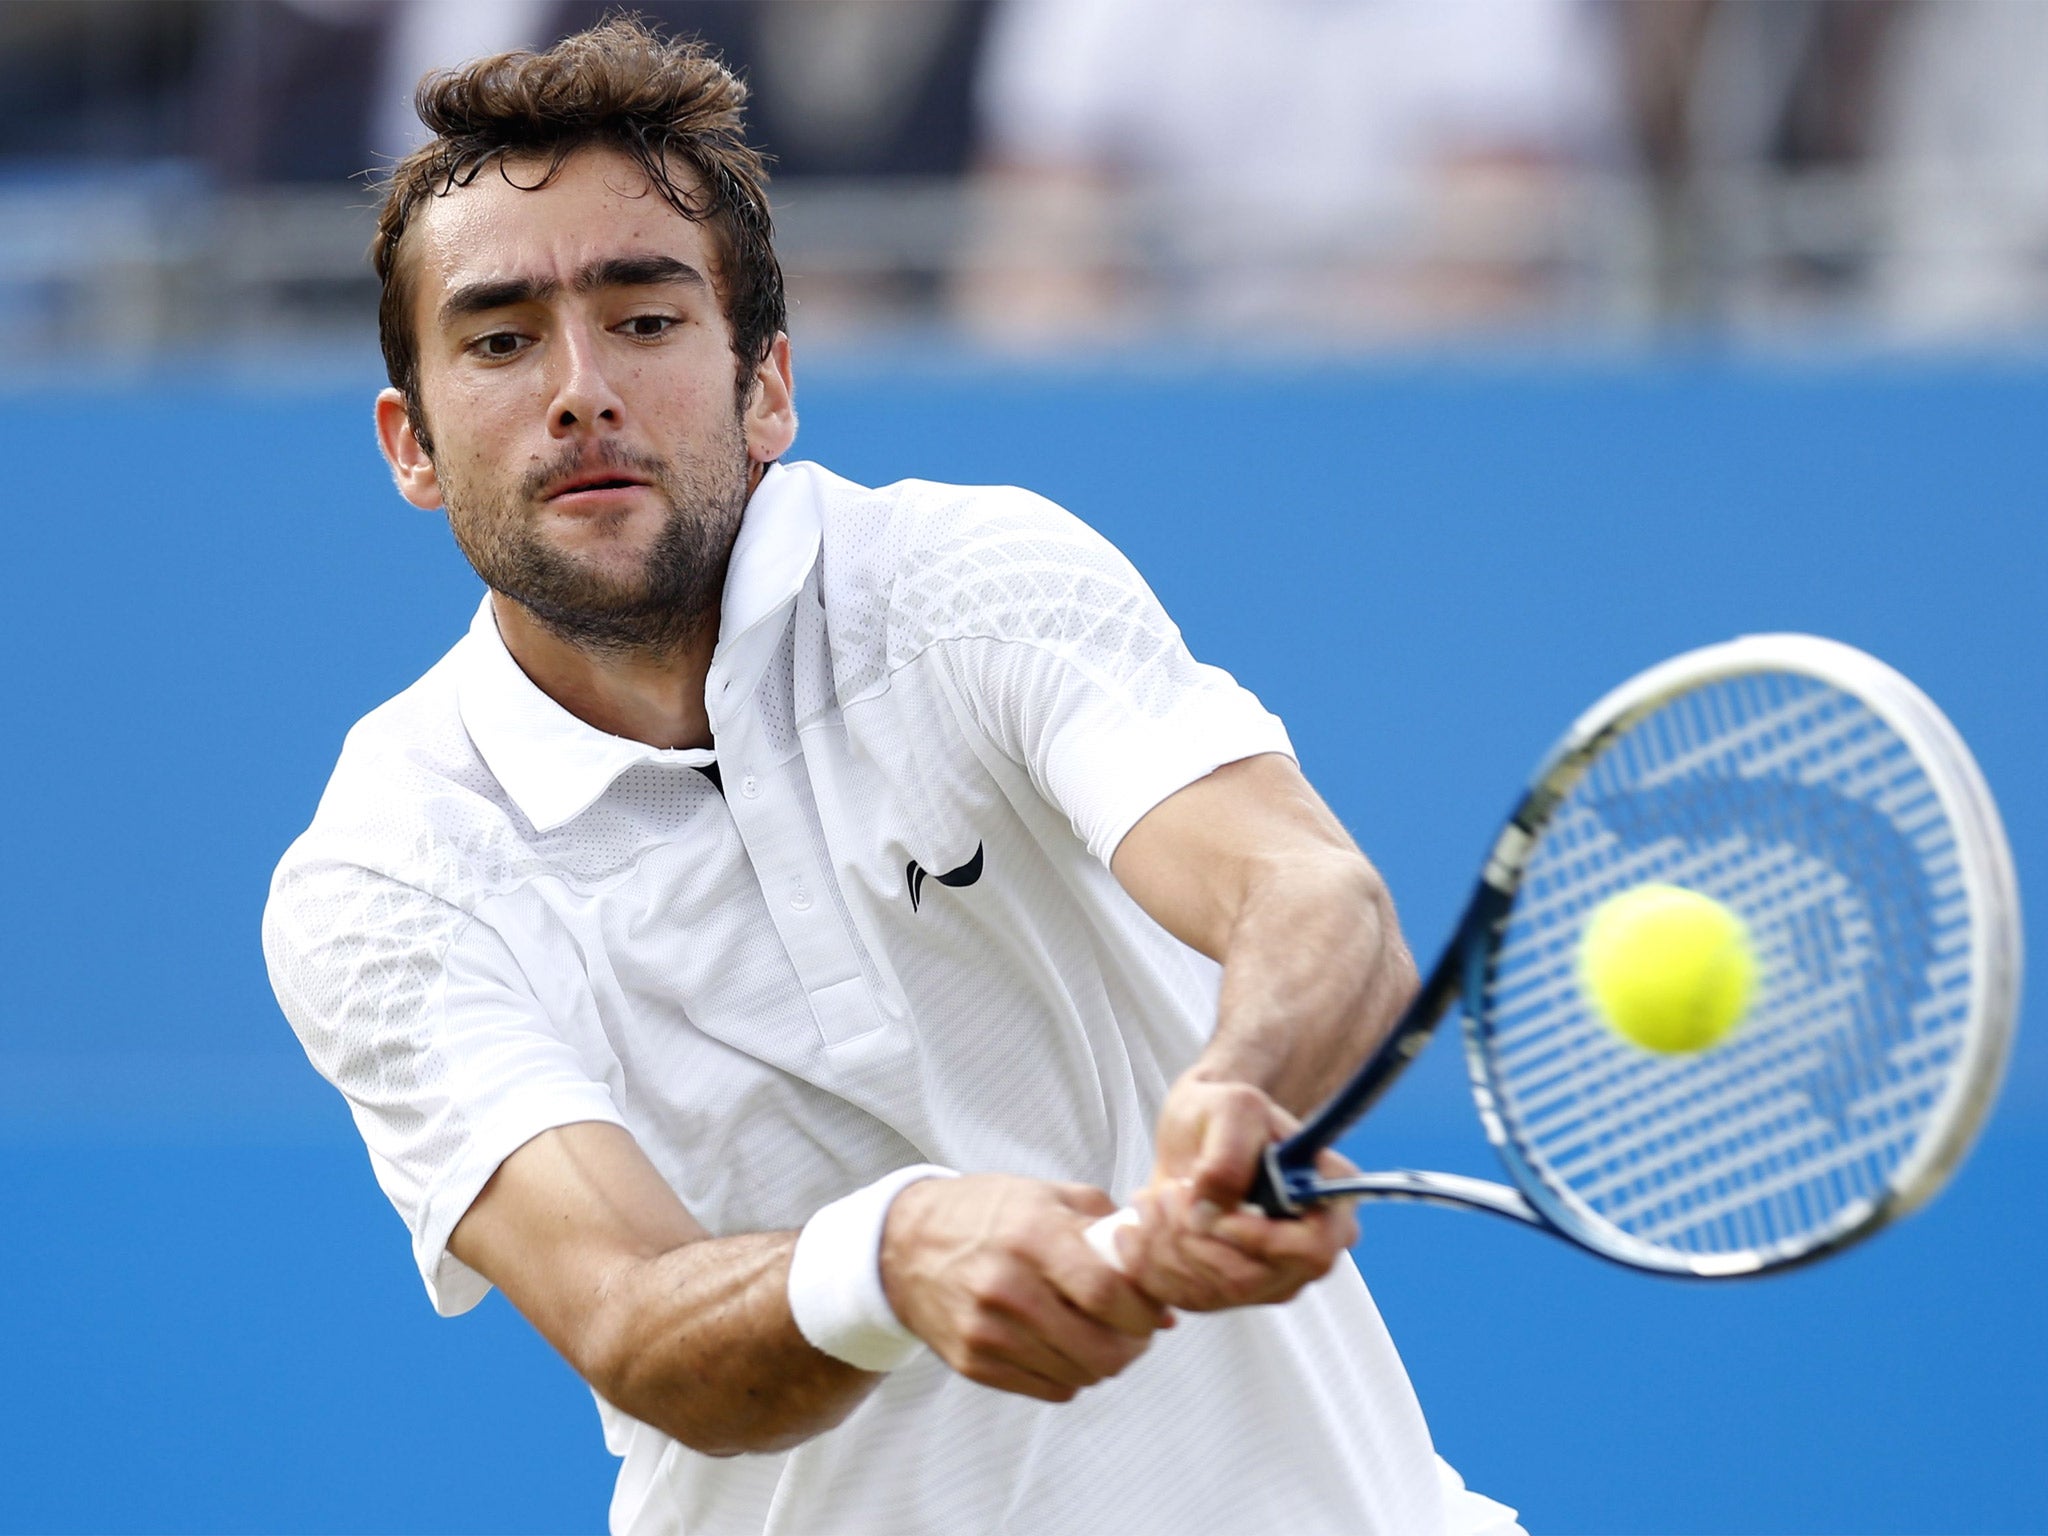 Marin Cilic is one guy who is definitely going places